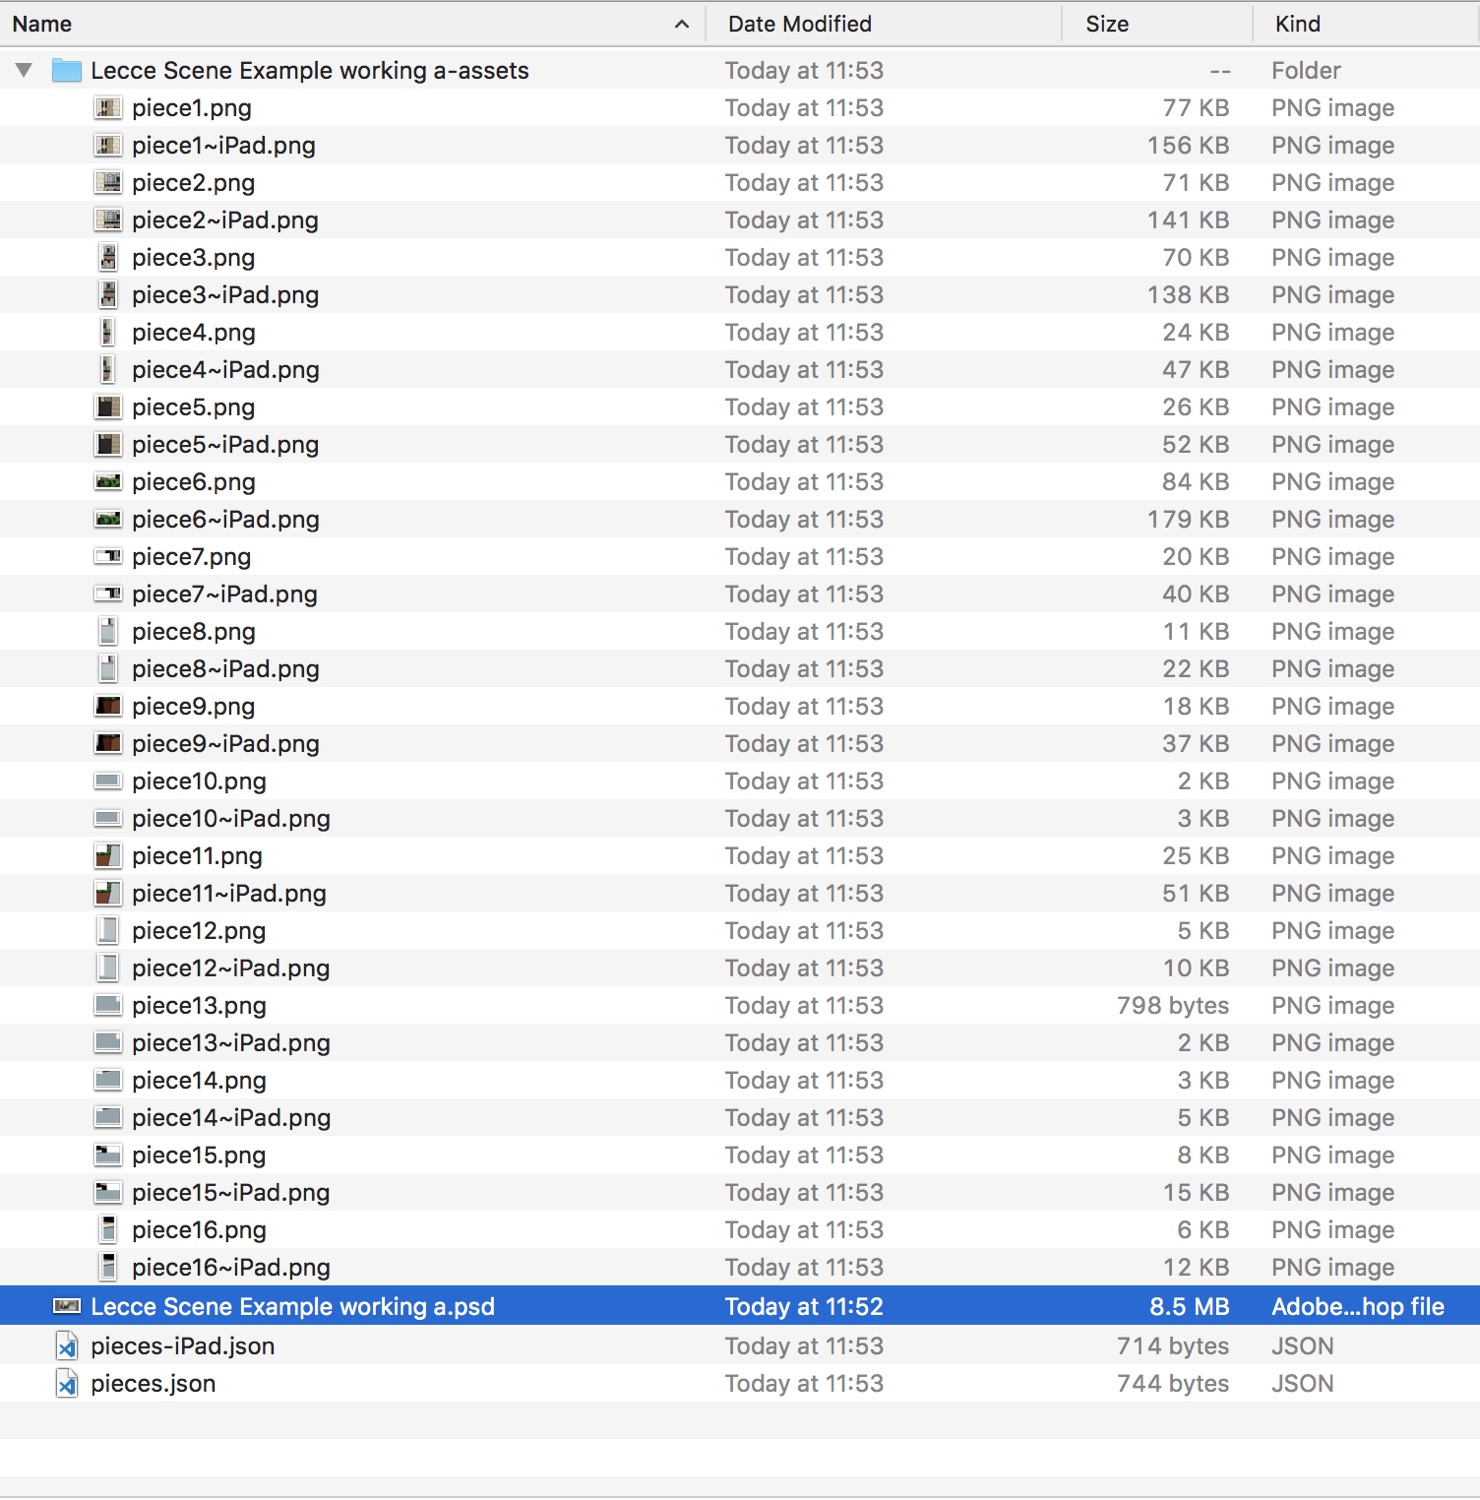 A screenshot of a finder window listing out the 32 pieces files (16 for iPhone and 16 for iPad) and the two JSON files.